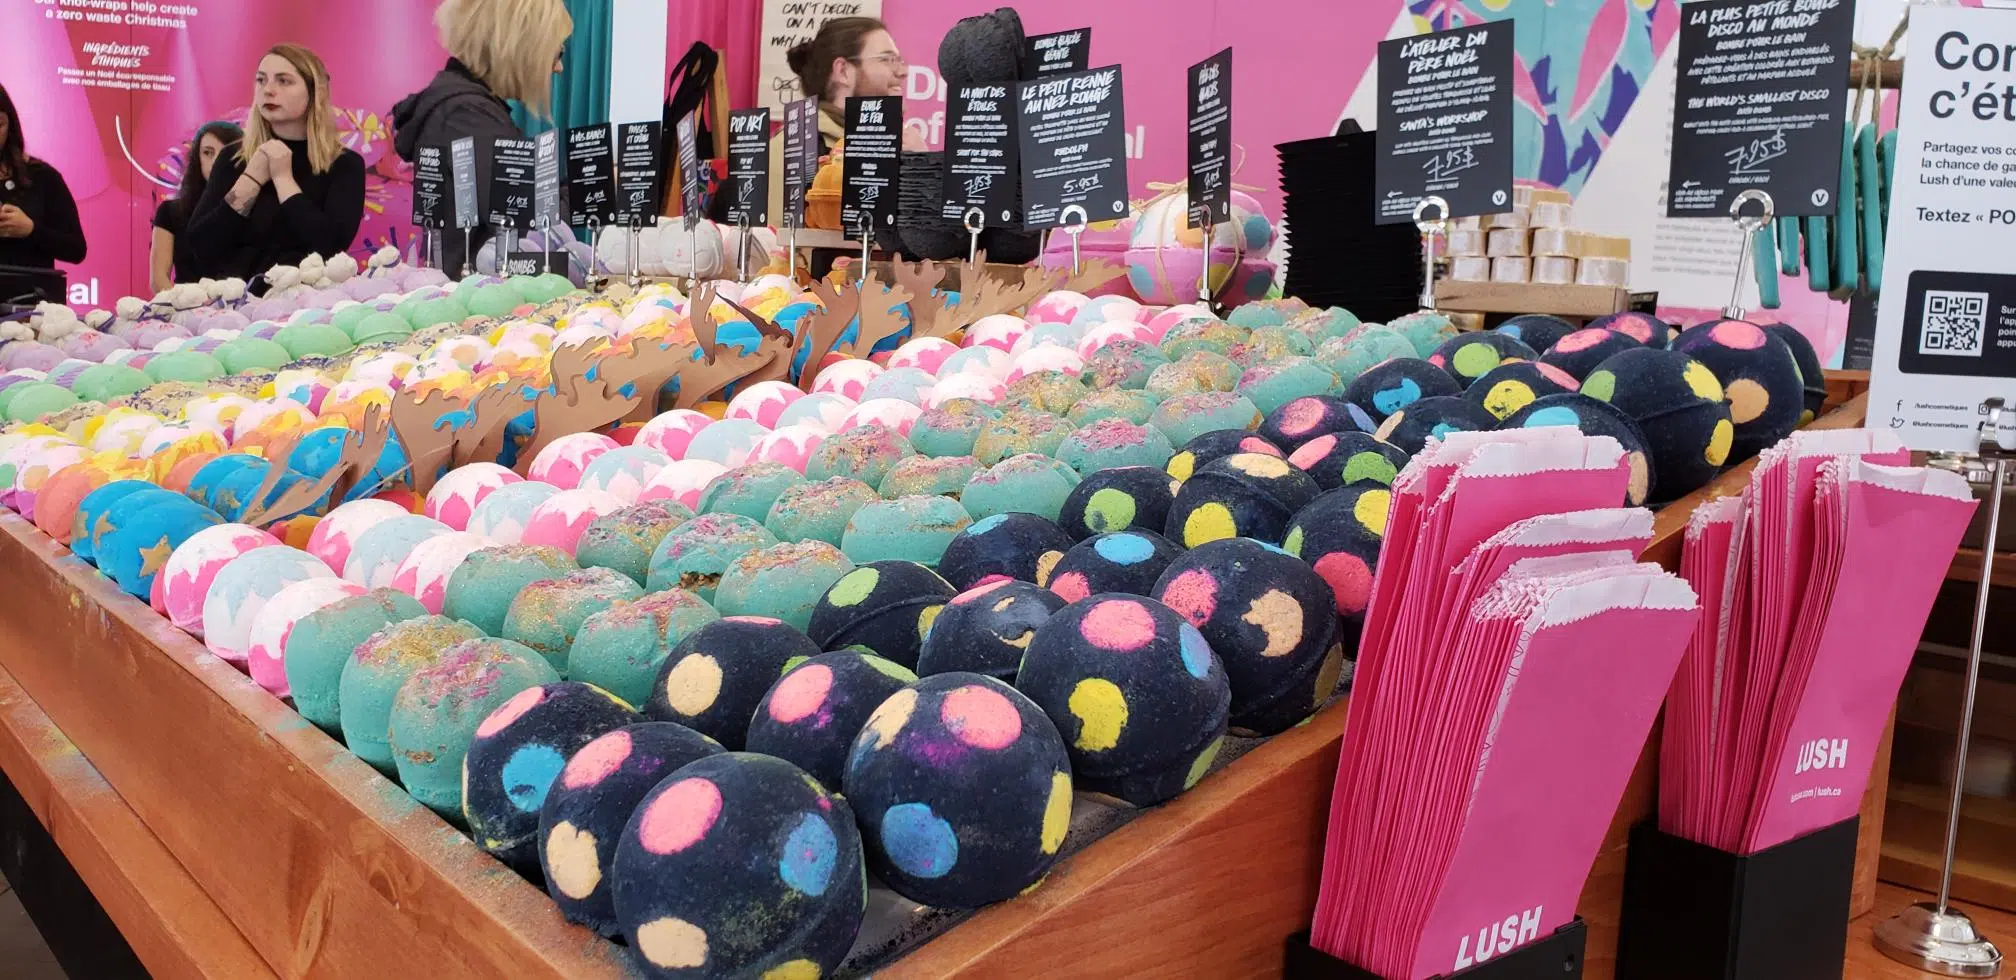 Lush’s Pop-Up Store Opens In Moncton To Get A Whiff Of Market Demand